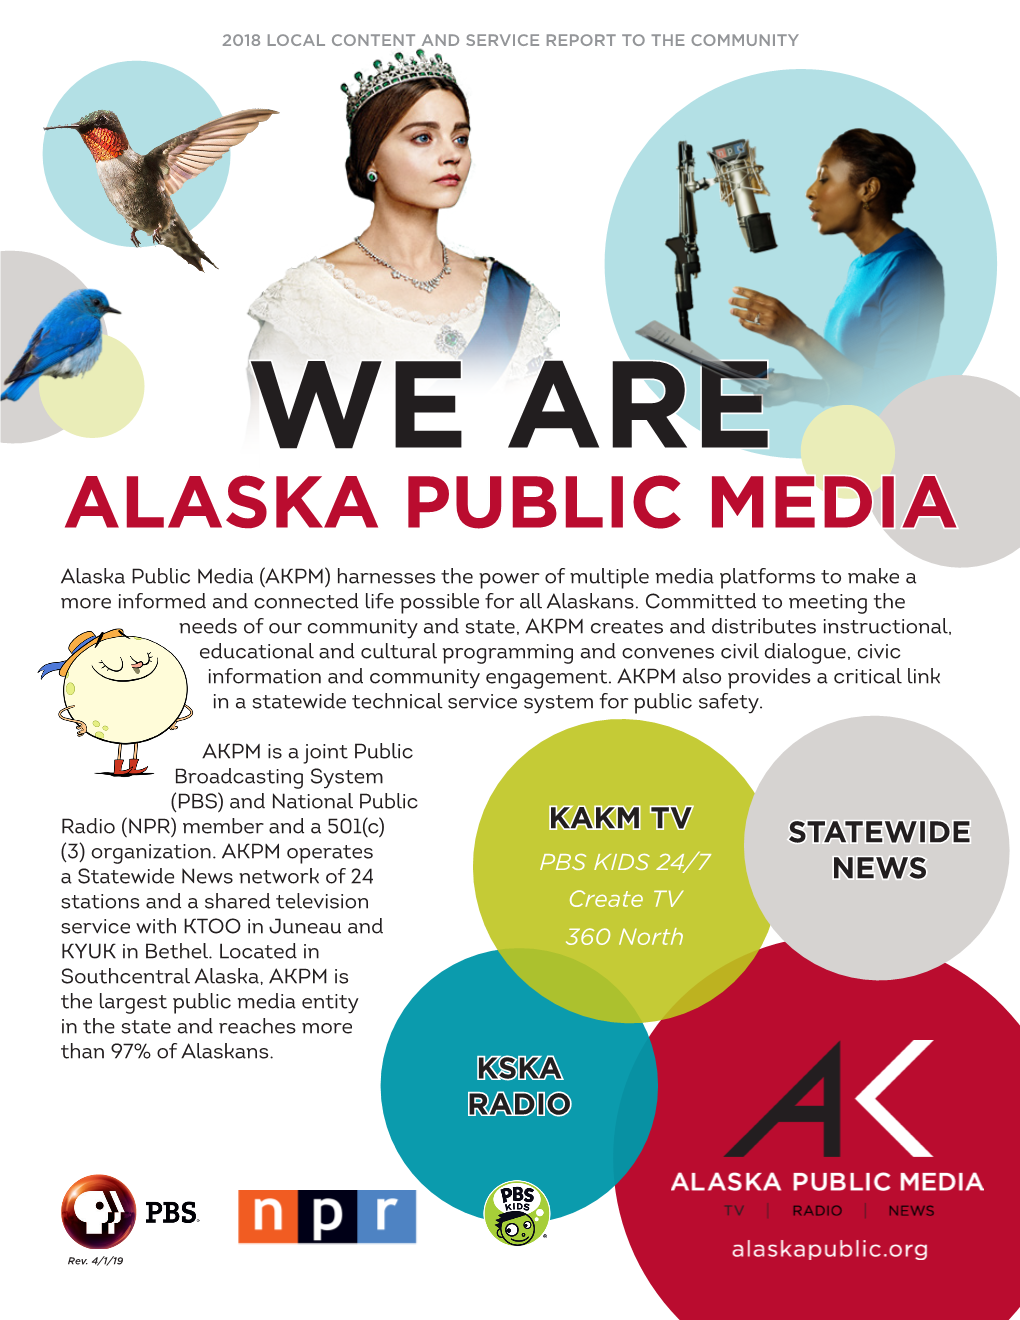 ALASKA PUBLIC MEDIA Alaska Public Media (AKPM) Harnesses the Power of Multiple Media Platforms to Make a More Informed and Connected Life Possible for All Alaskans